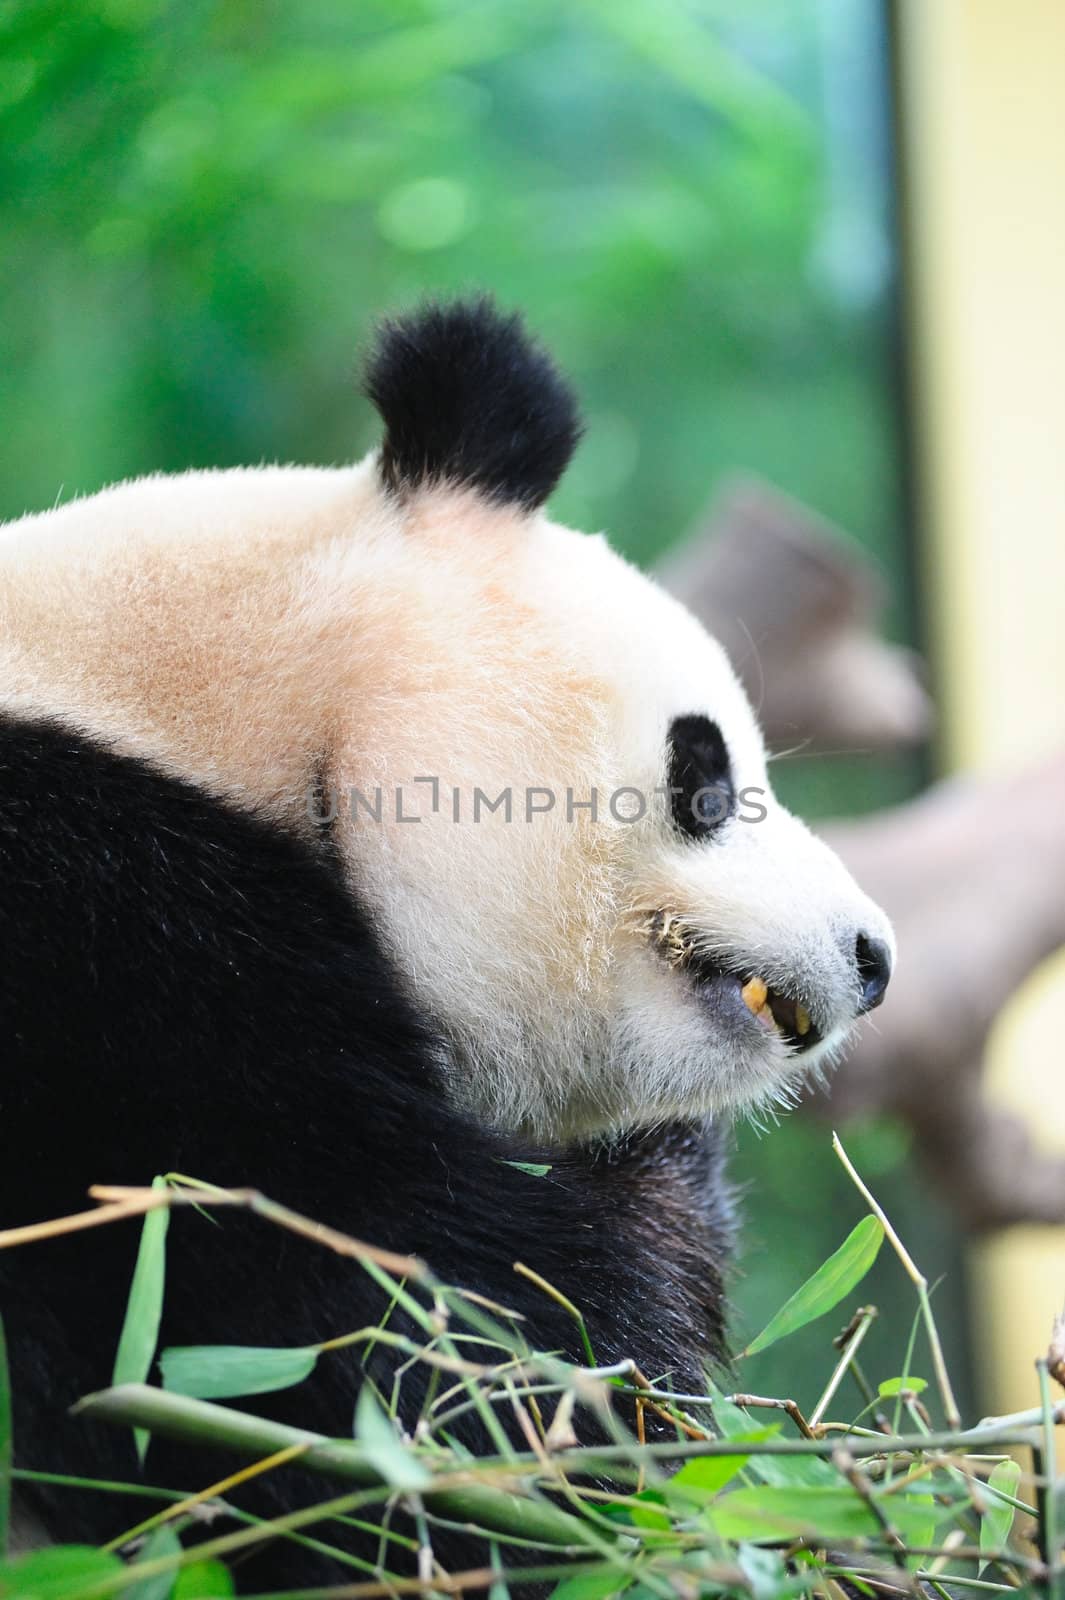 A giant panda lying on the ground and eating bamboo